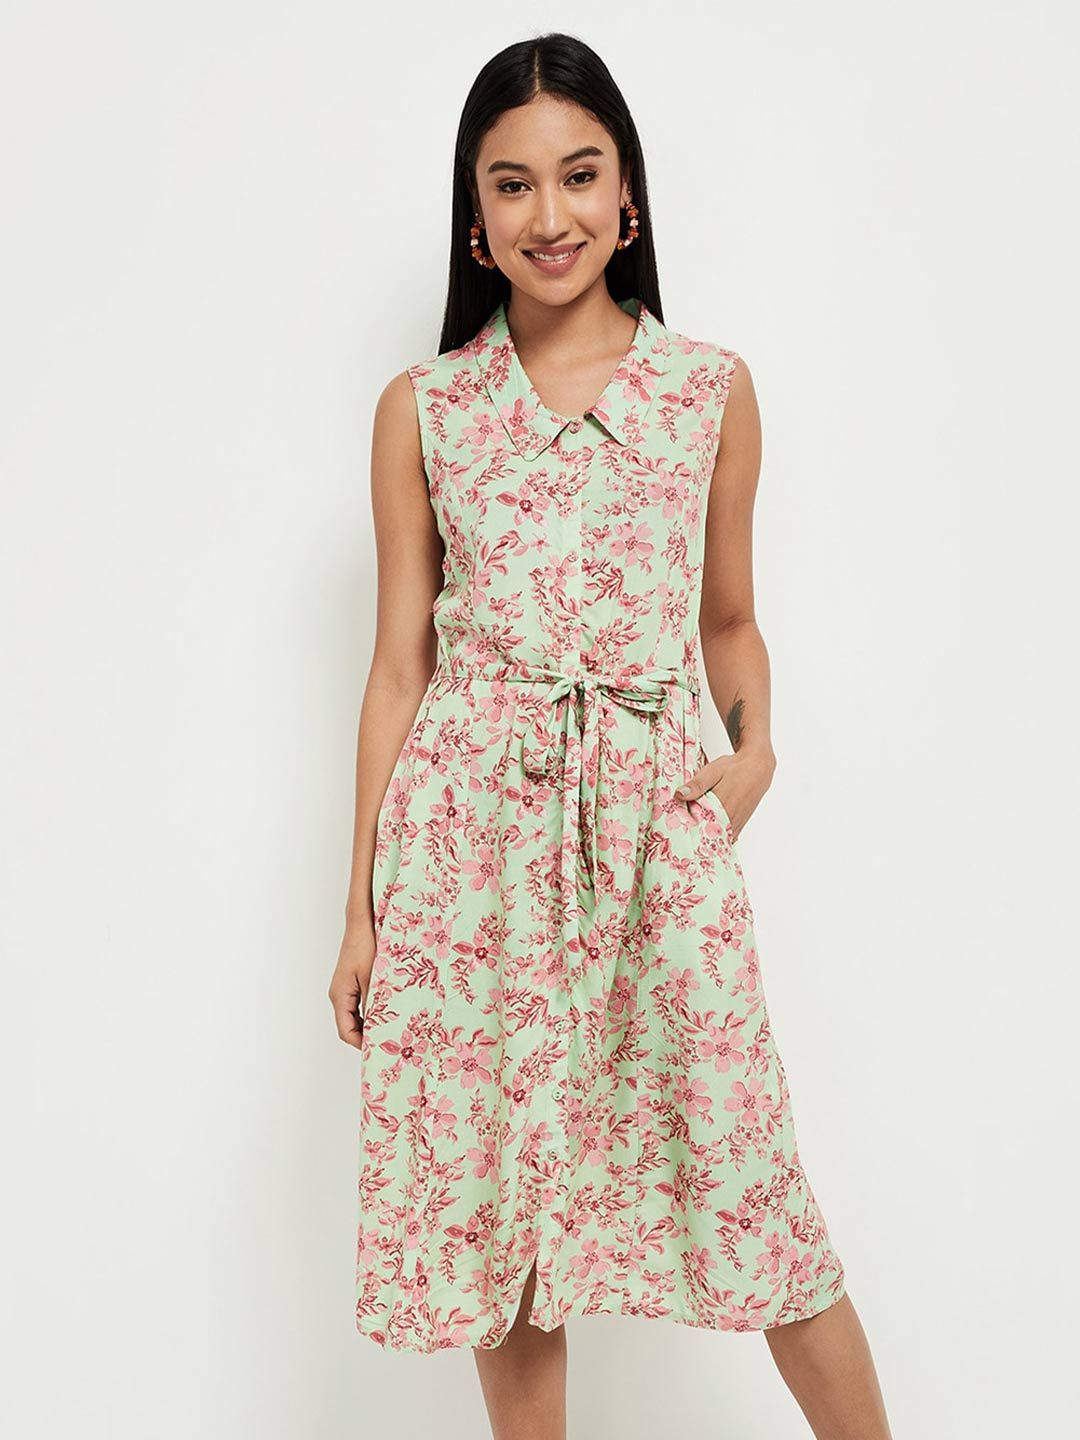 max Women Green Floral Dress Price in India